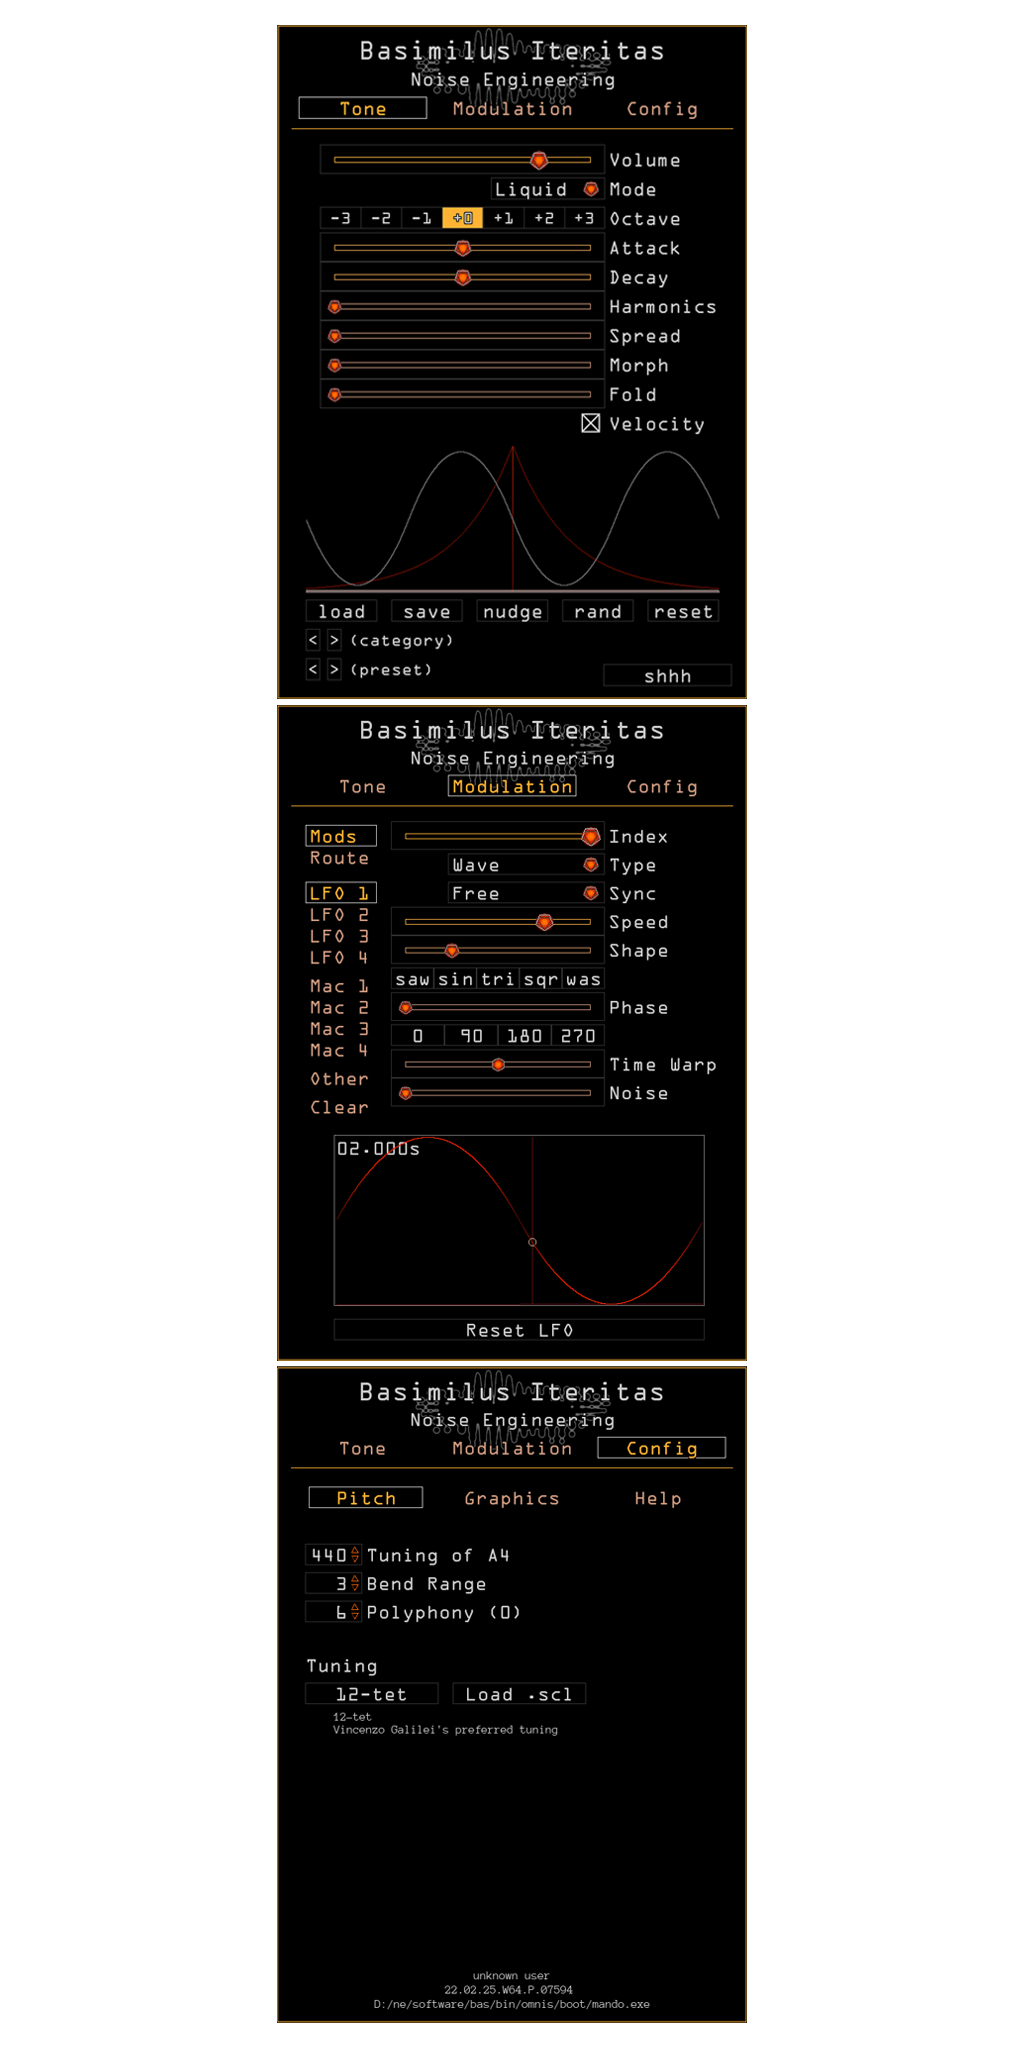 Basimilus Iteritas plugin for VST, AU, and AAX in Orange. On the Tone page are main parameters that set the timbre of the synth. Presets are also controlled here. The Modulation page showing parameters for LFO1. The Configuration page for the Pitch setting is also shown. Here you can load scala files and set the tuning, polyphony, and bend range. | Noise Engineering